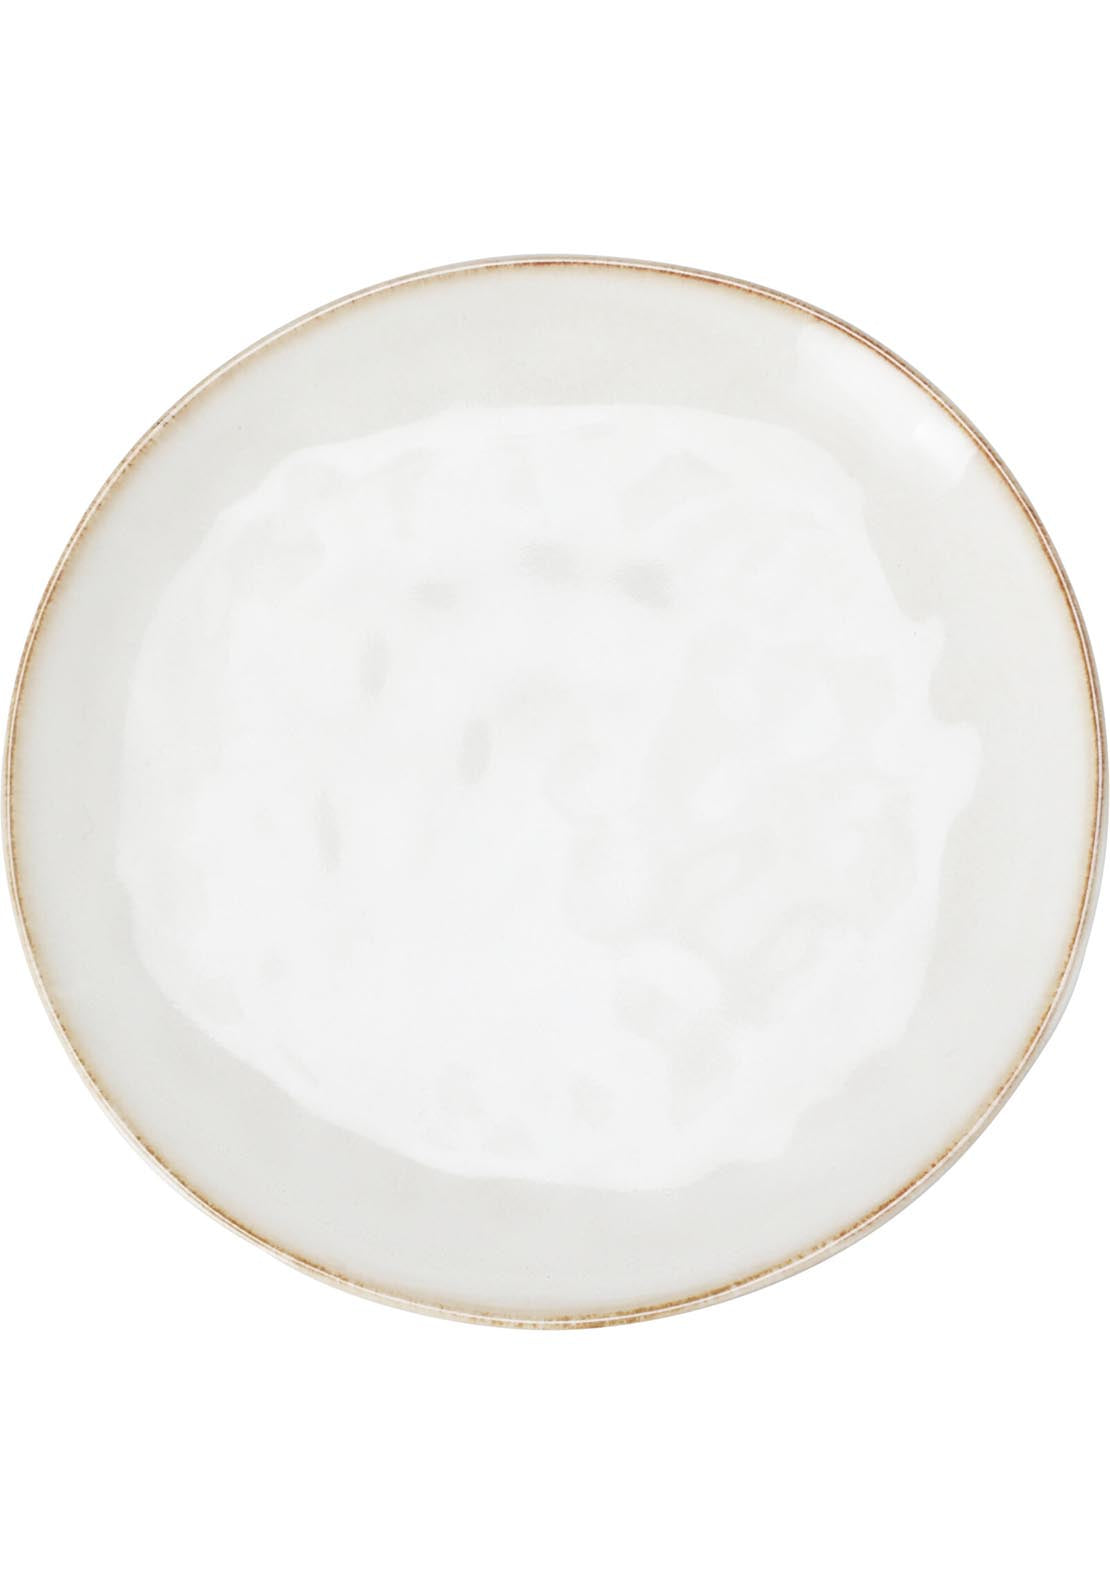 The Home Dining Plate Stoneware 210mm x 23mm 1 Shaws Department Stores